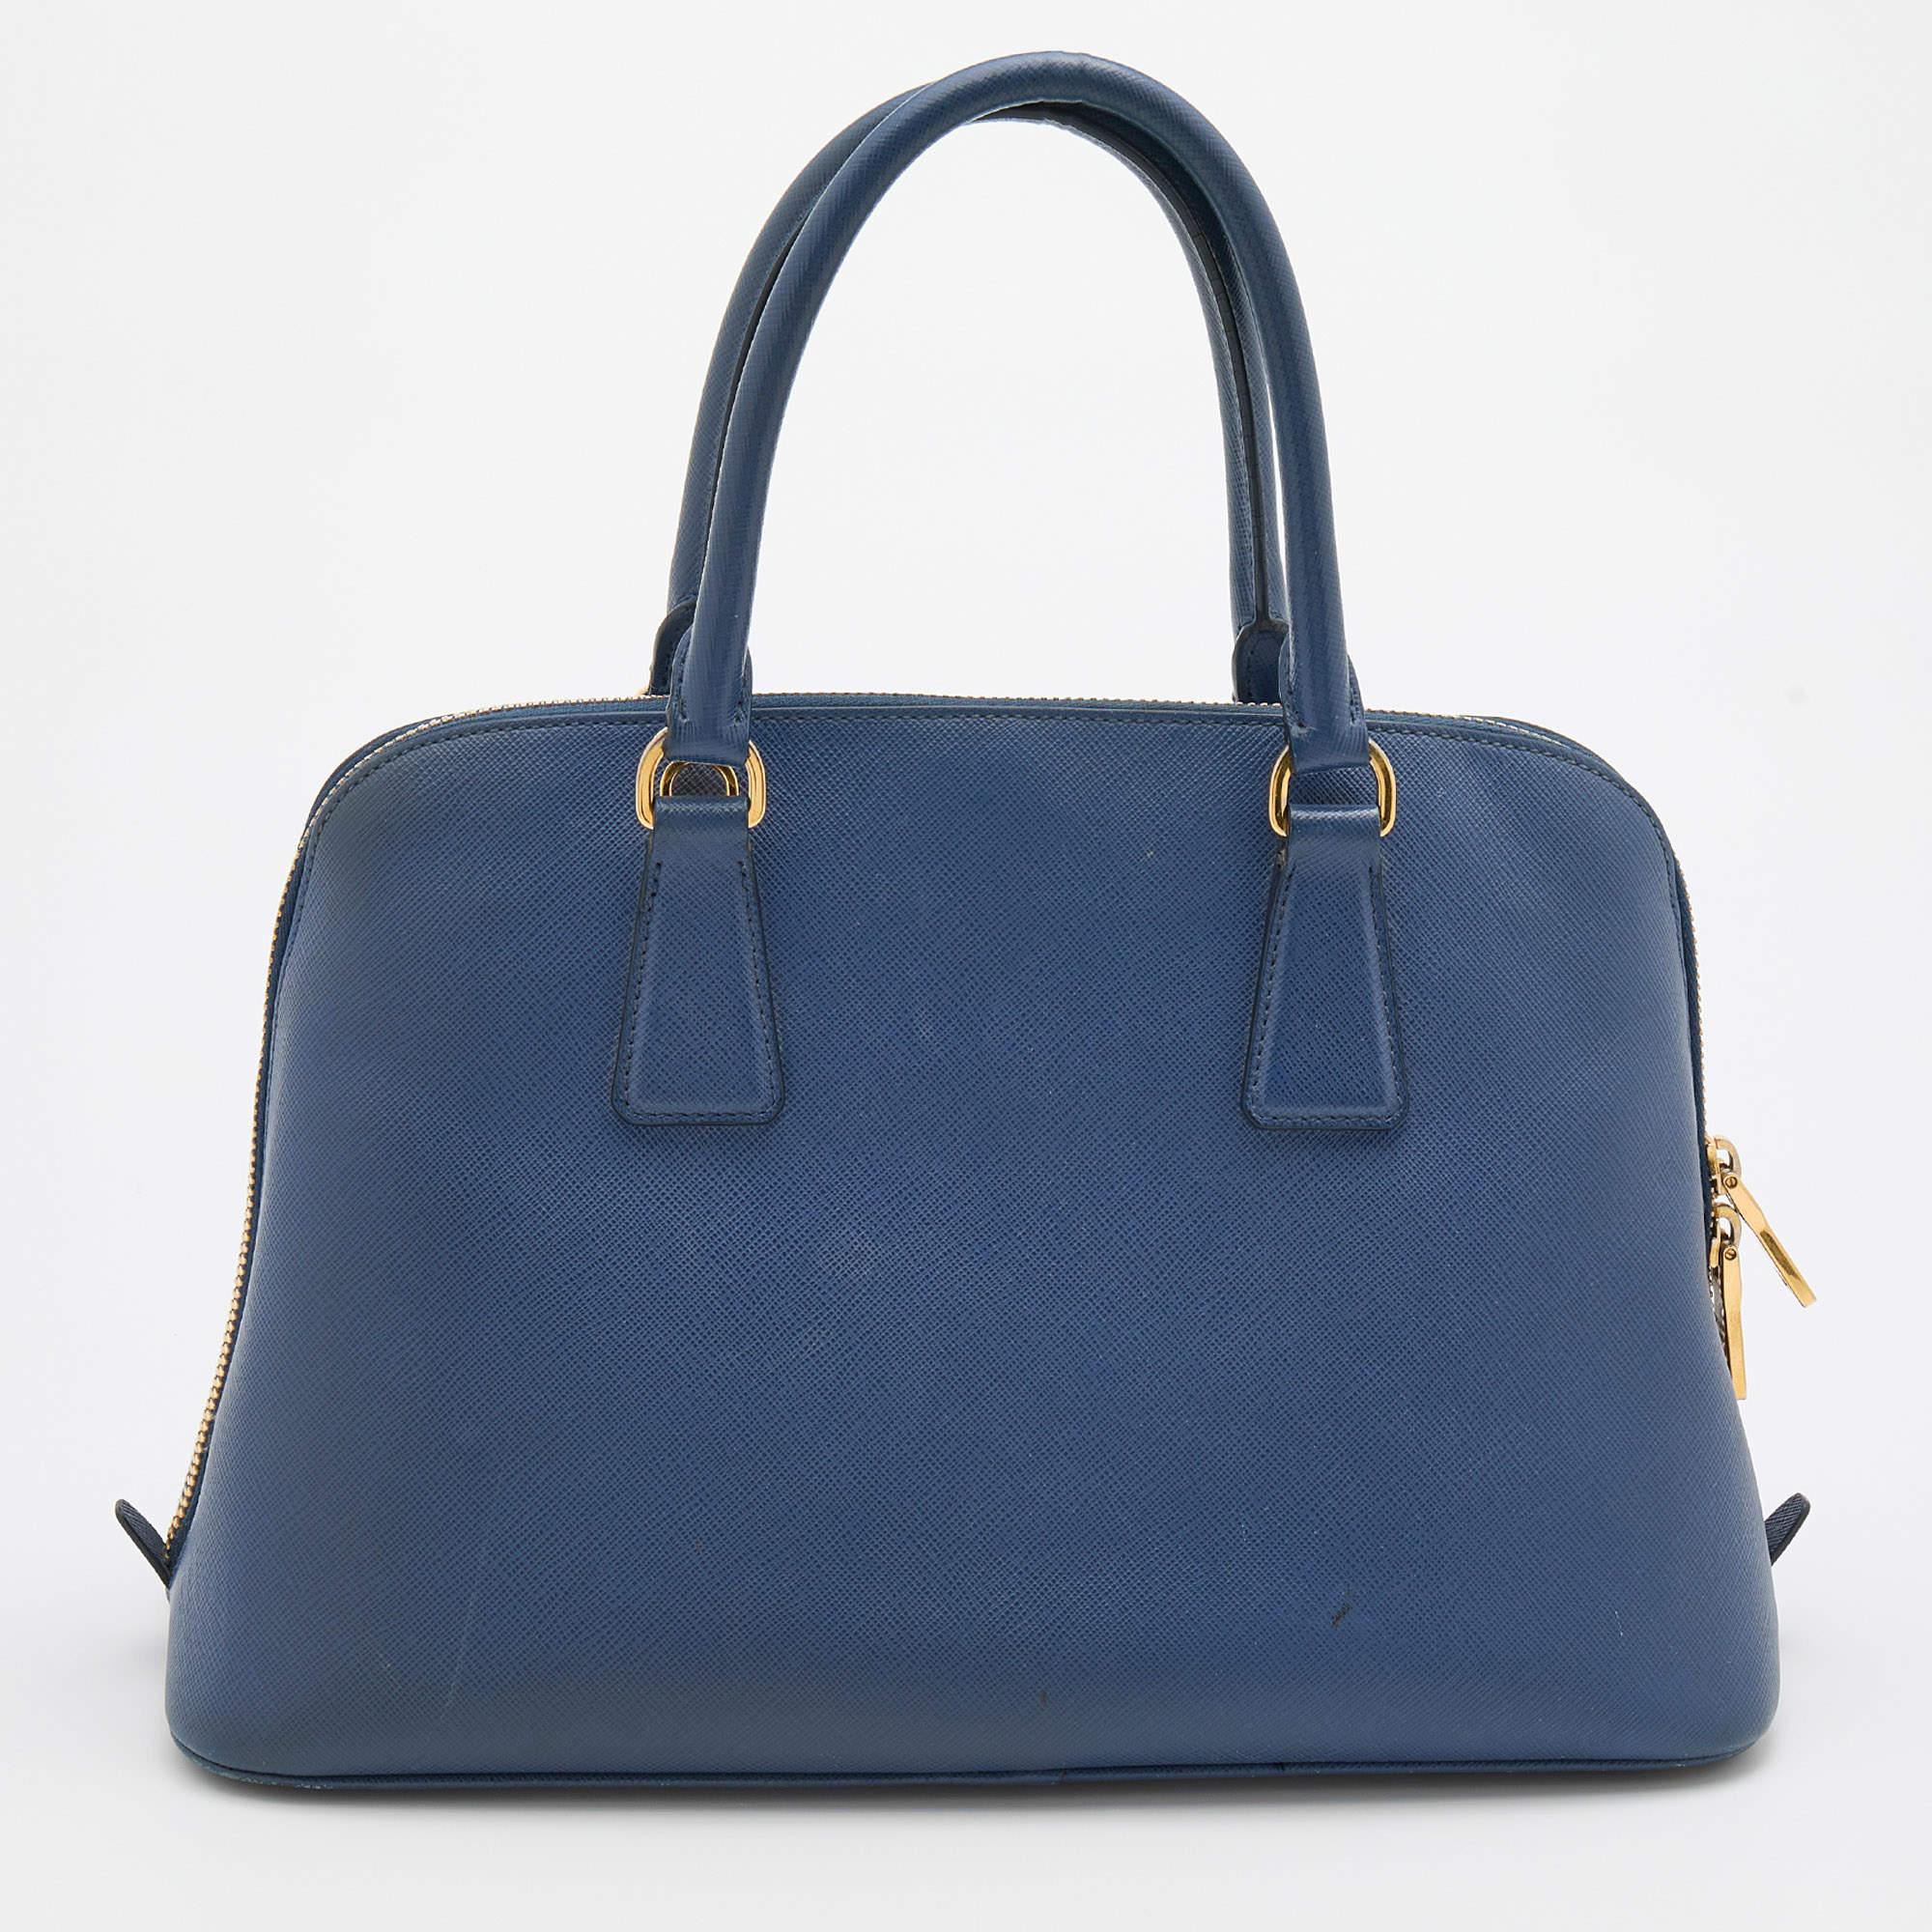 With an elegant design, this satchel is rendered in the finest quality material. Versatile and functional, this carryall is well-sized for your daily wear.

